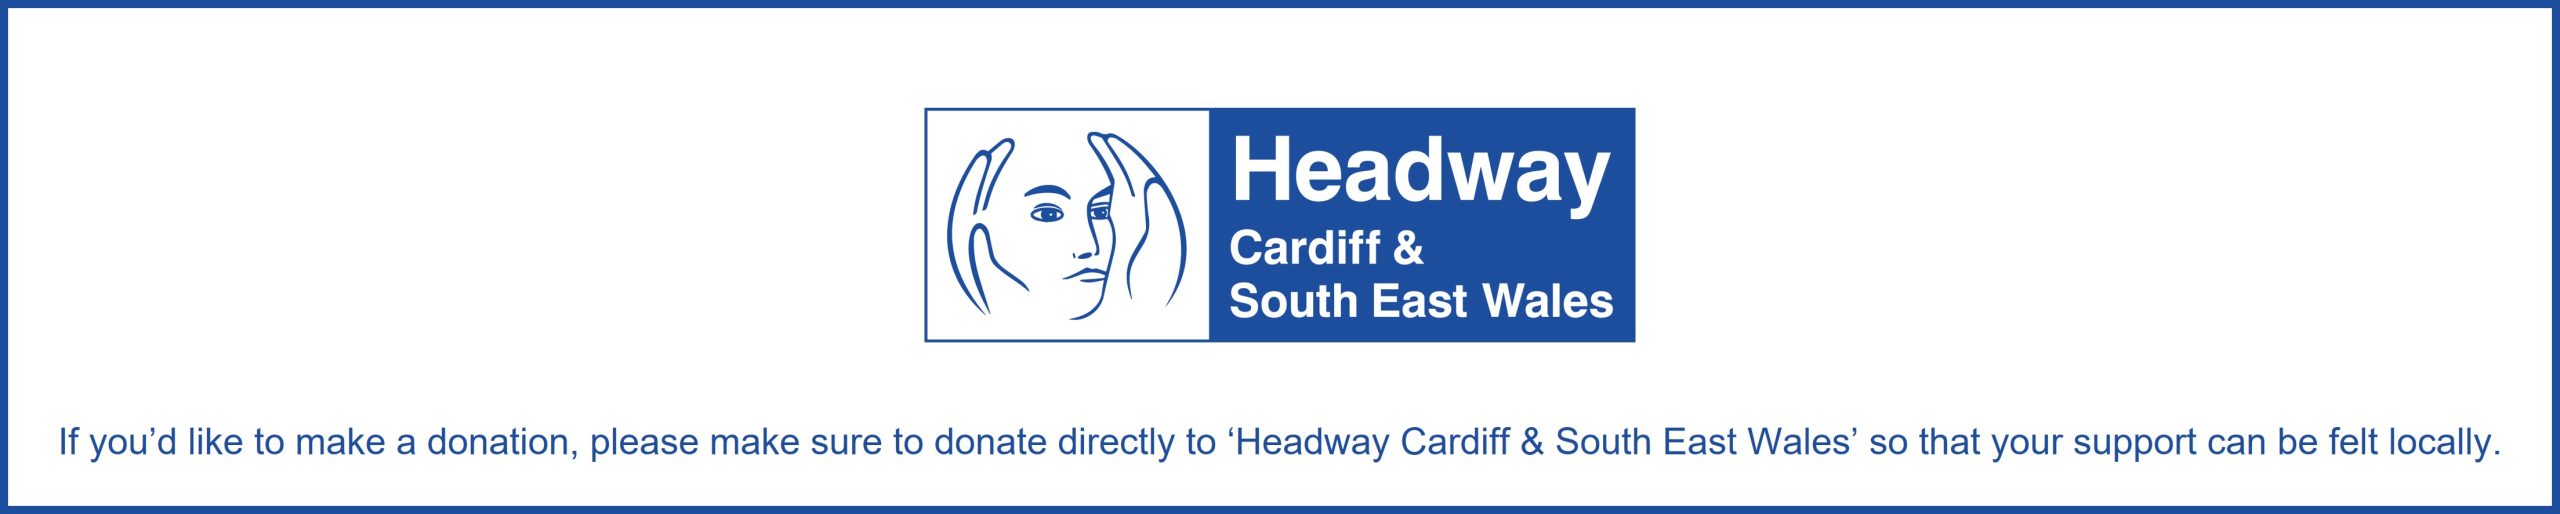 Headway Cardiff & South East Wales Logo